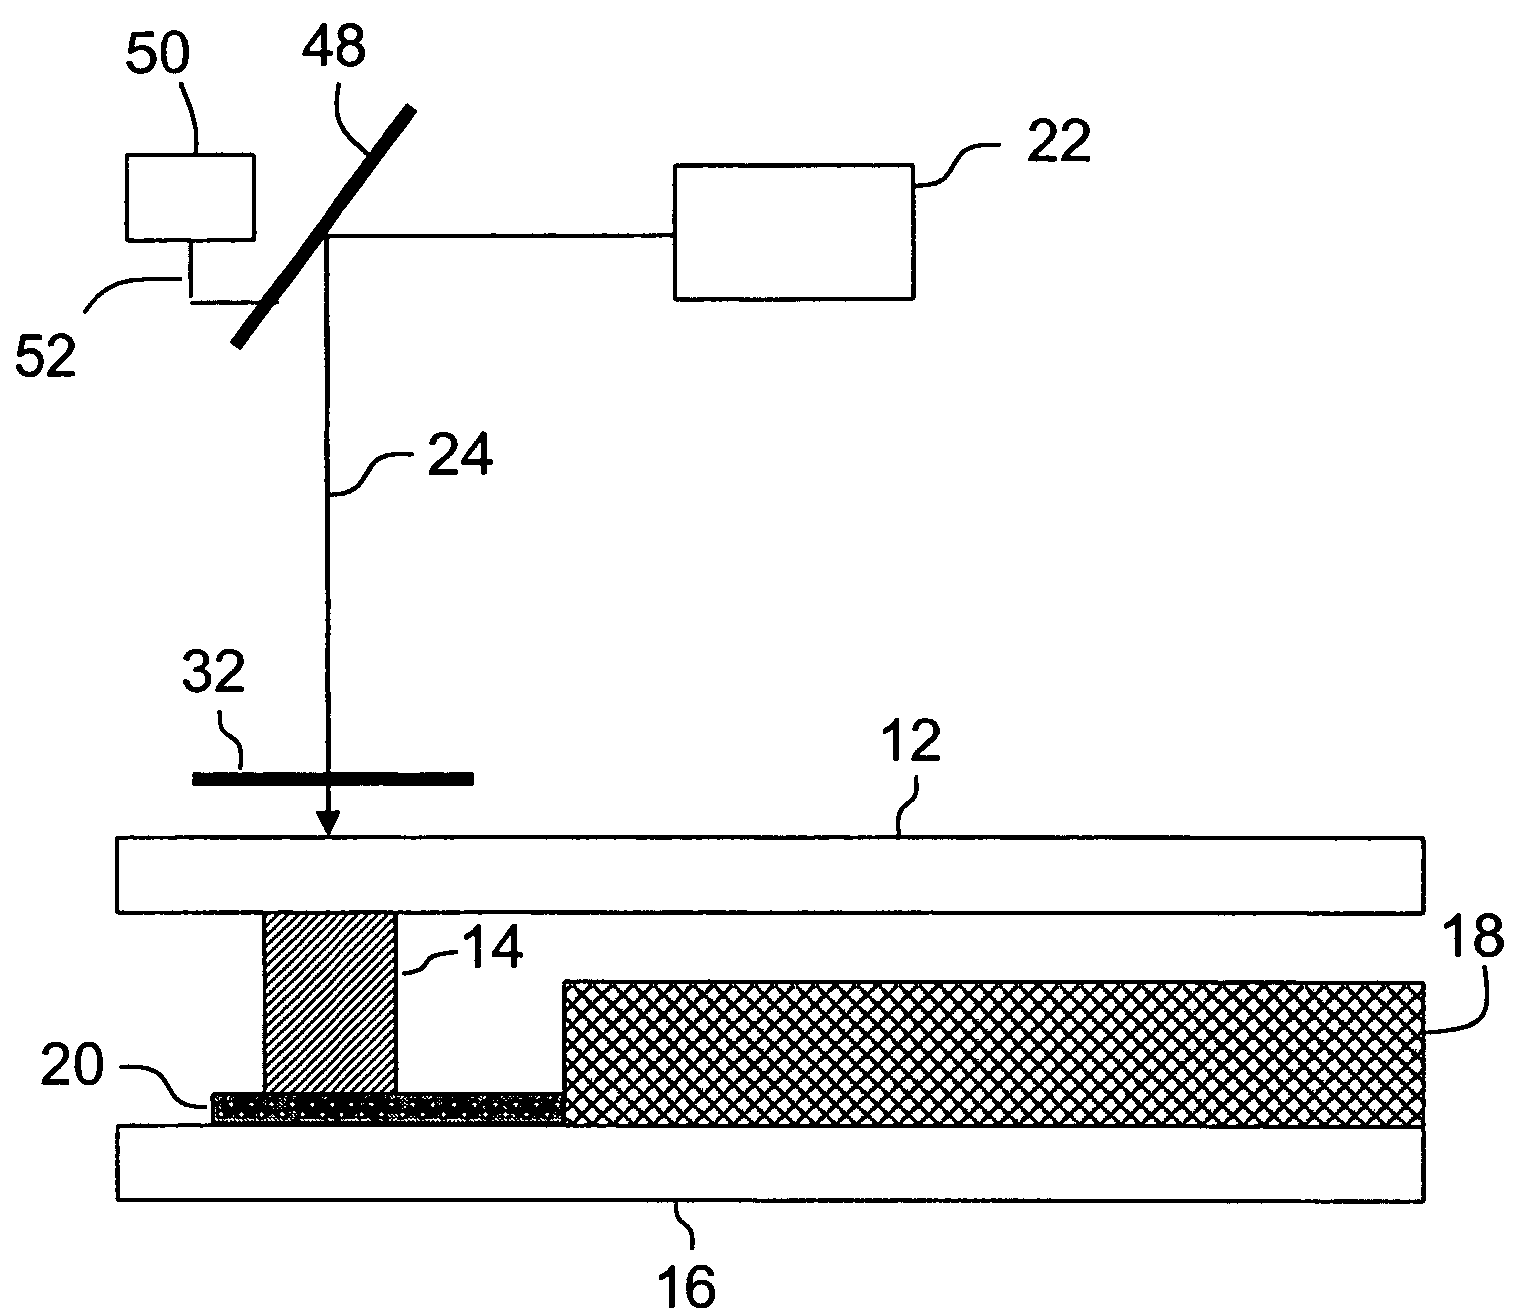 Method of encapsulating a display element with frit wall and laser beam